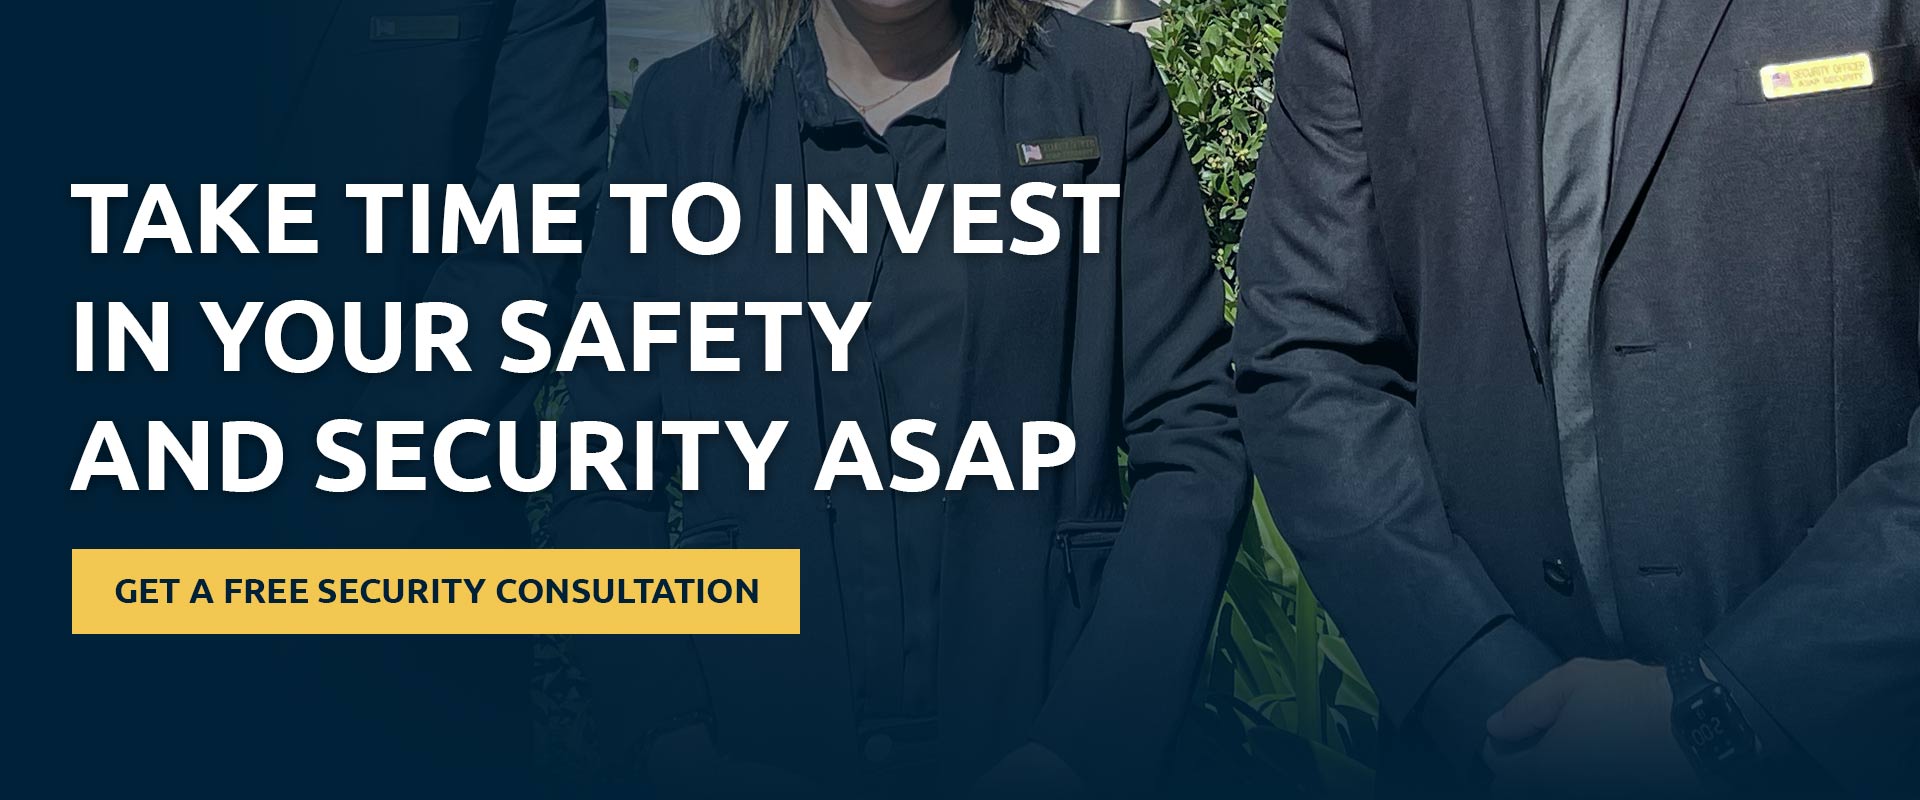 Take Time to Invest in your safety and security ASAP - Get a free security consultation